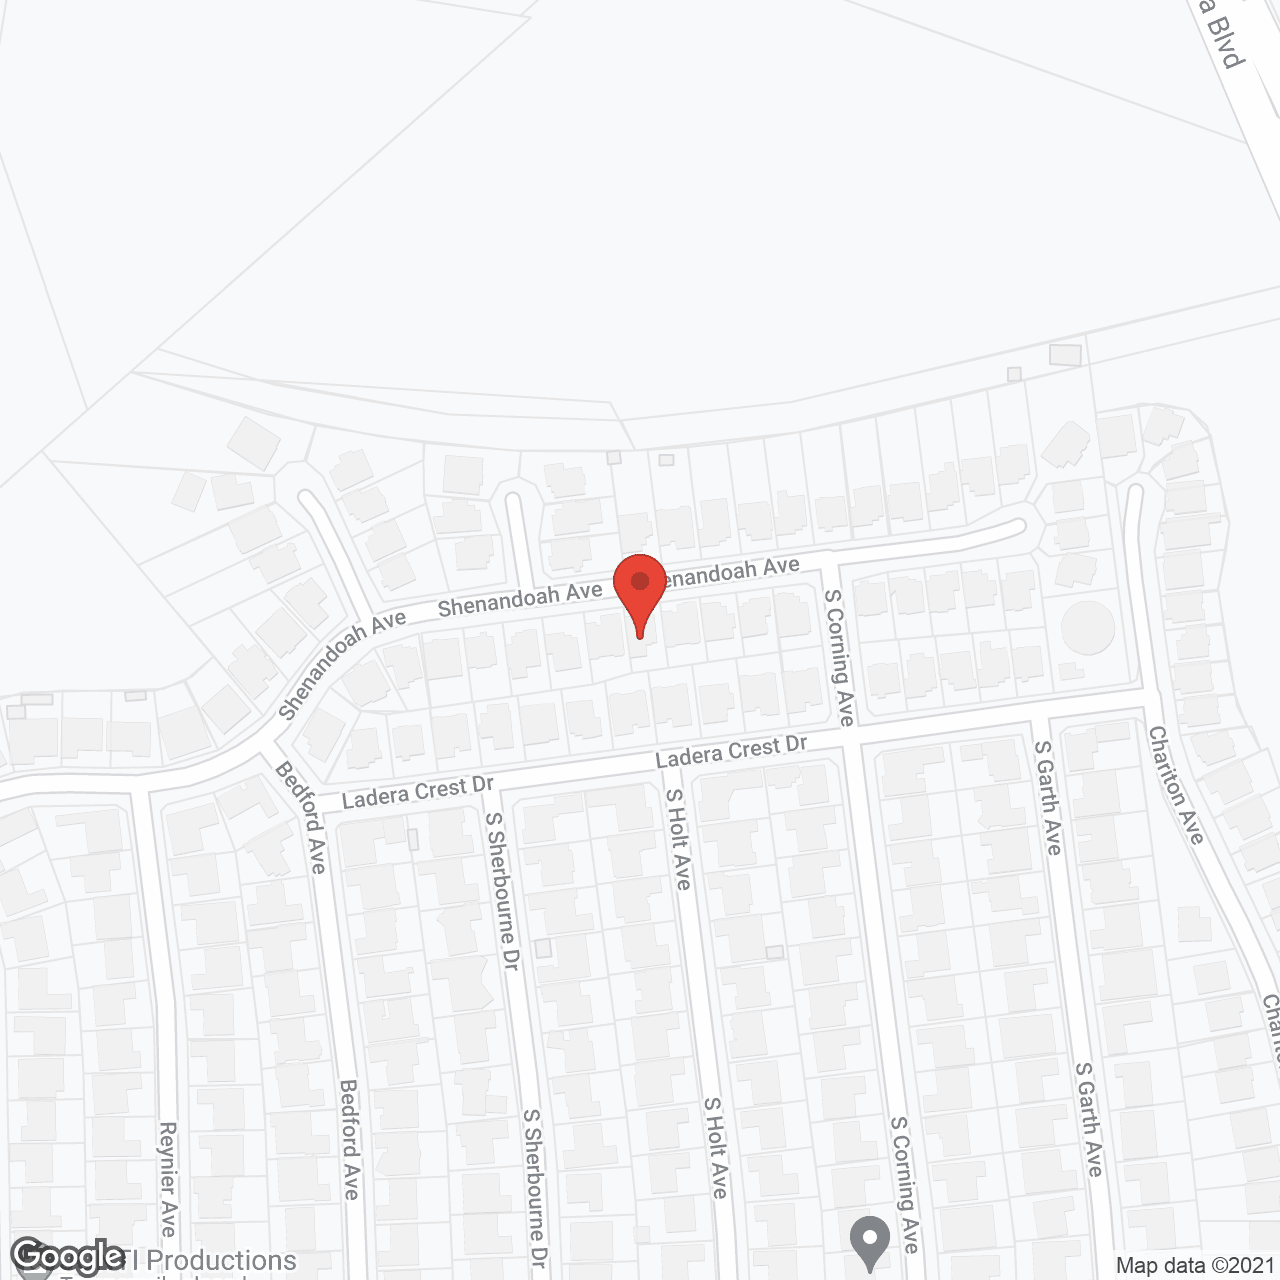 Eleanor's Residential Home in google map